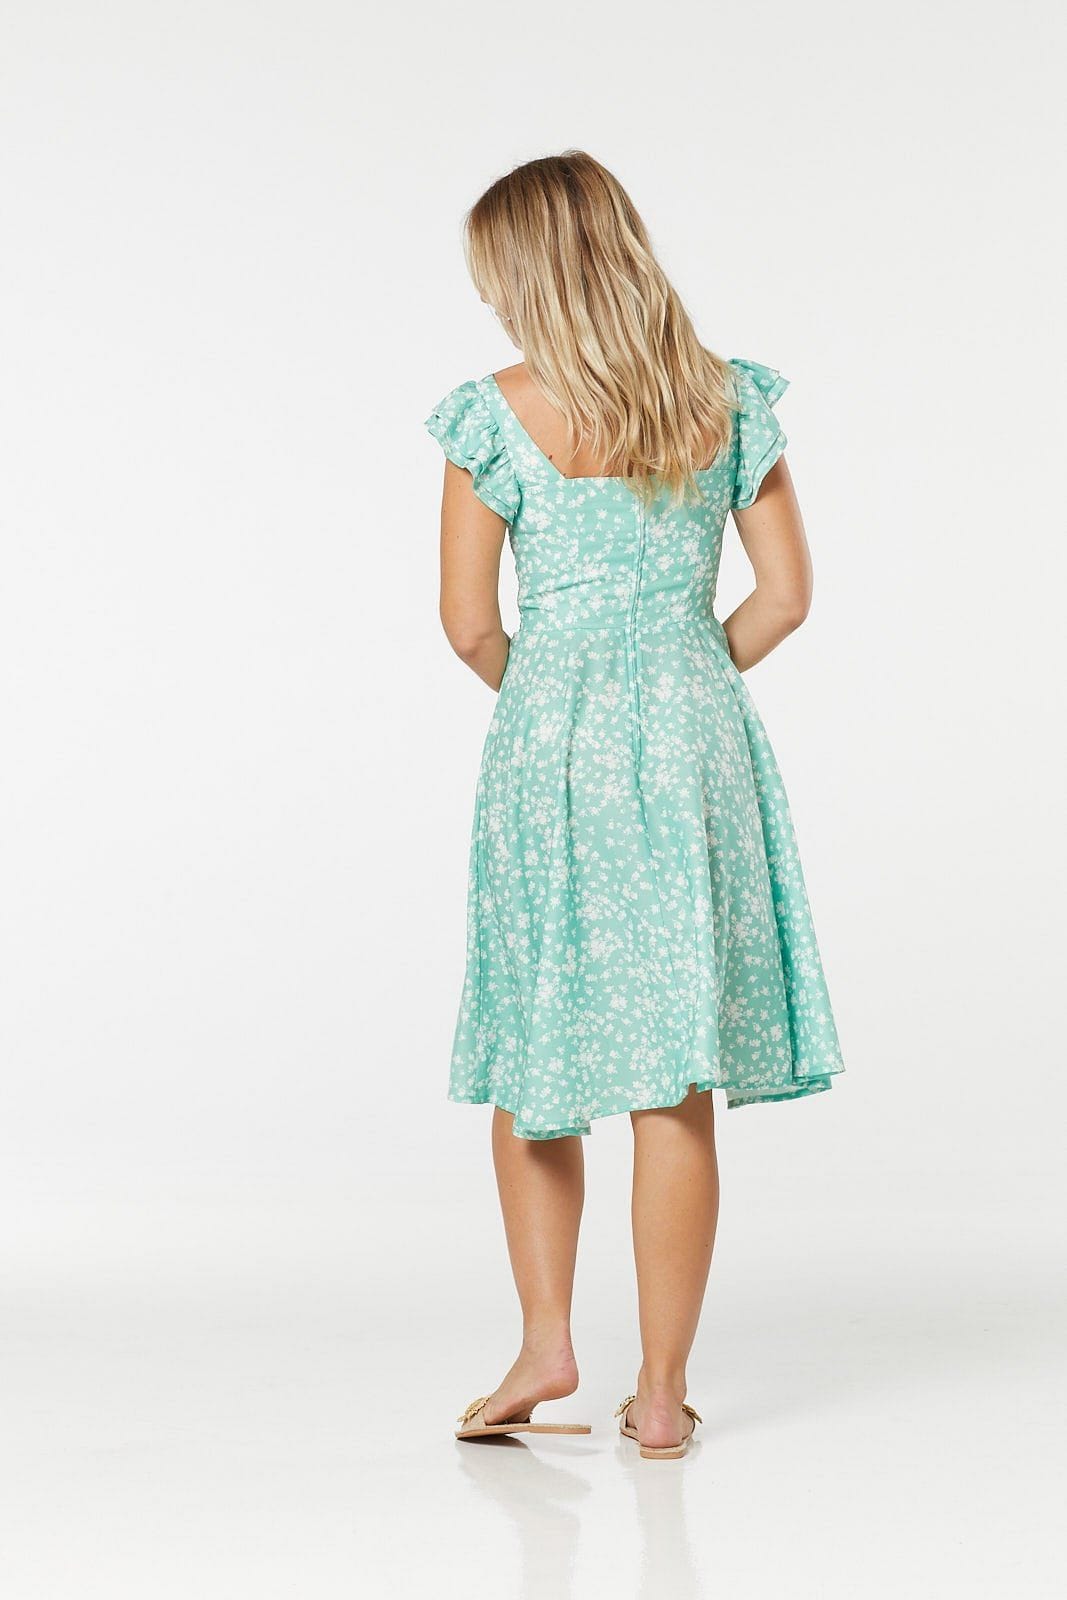 Tory 40s 50s Inspired Mint Green Floral Tea Dress With Frilly Sleeves